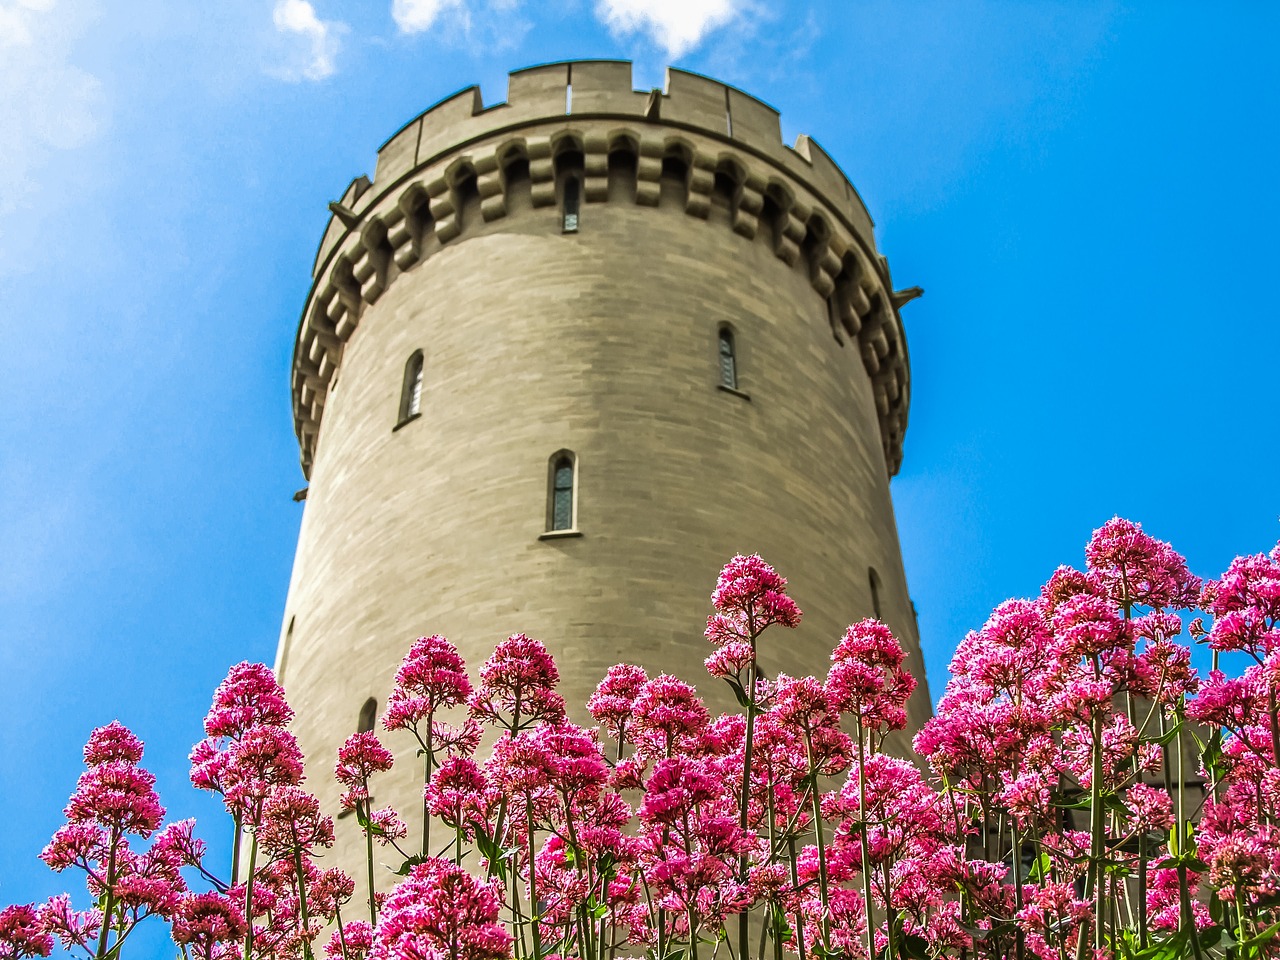 arundel castle tower monument free photo